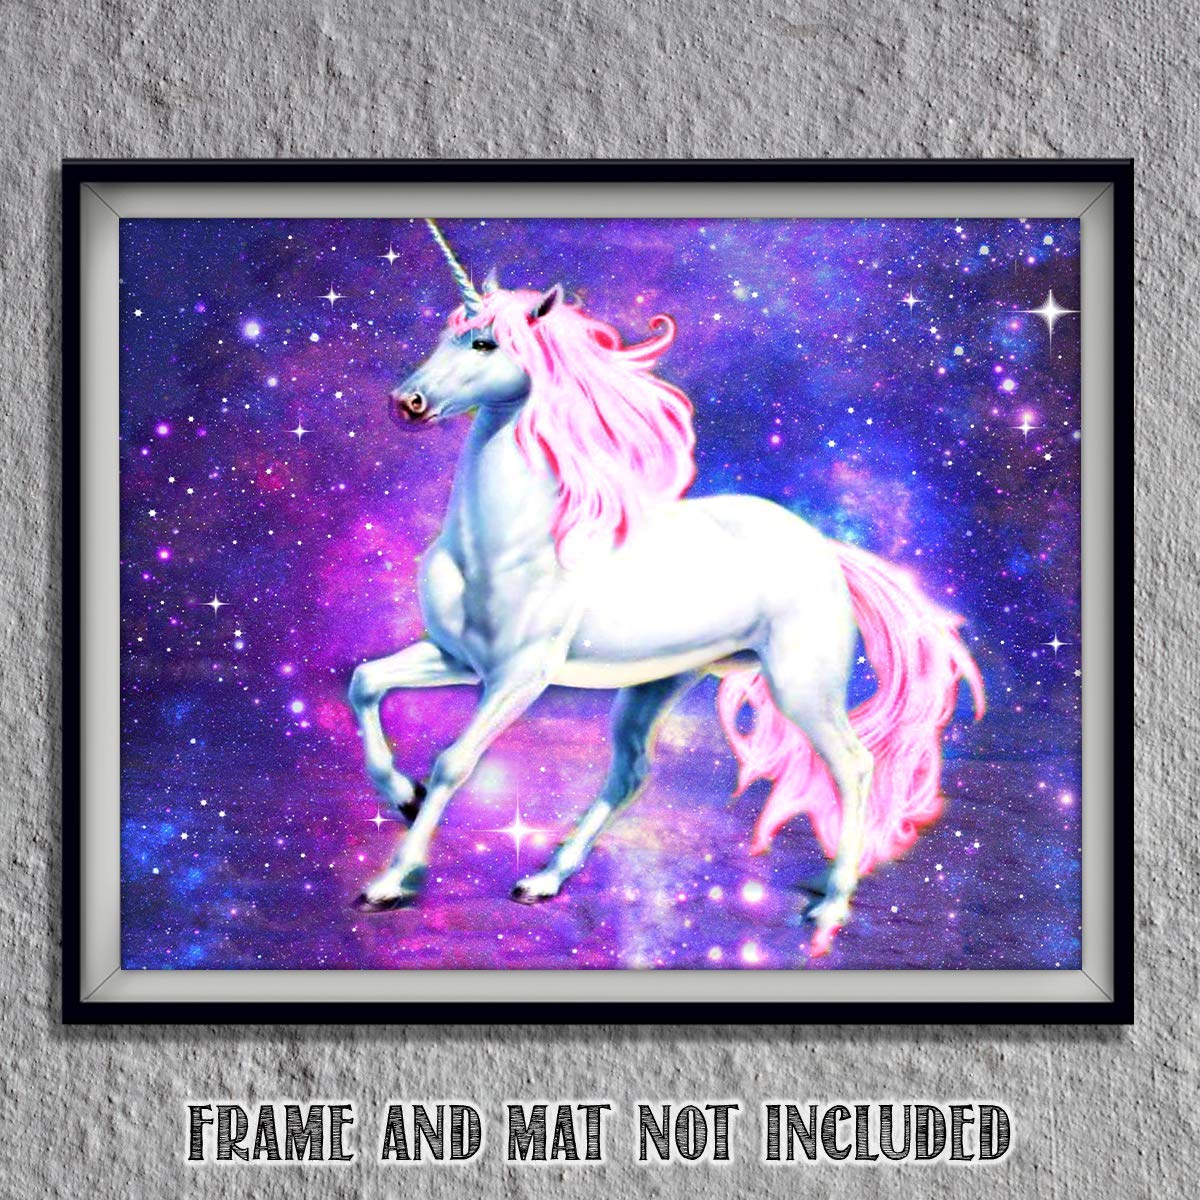 Royal Unicorn & Stardust- 8 x 10" Print Wall Art- Ready to Frame- Home D?cor, Nursery D?cor & Wall Prints for Animal Themes & Children's Bedroom Wall Decor. Just Too Cute!